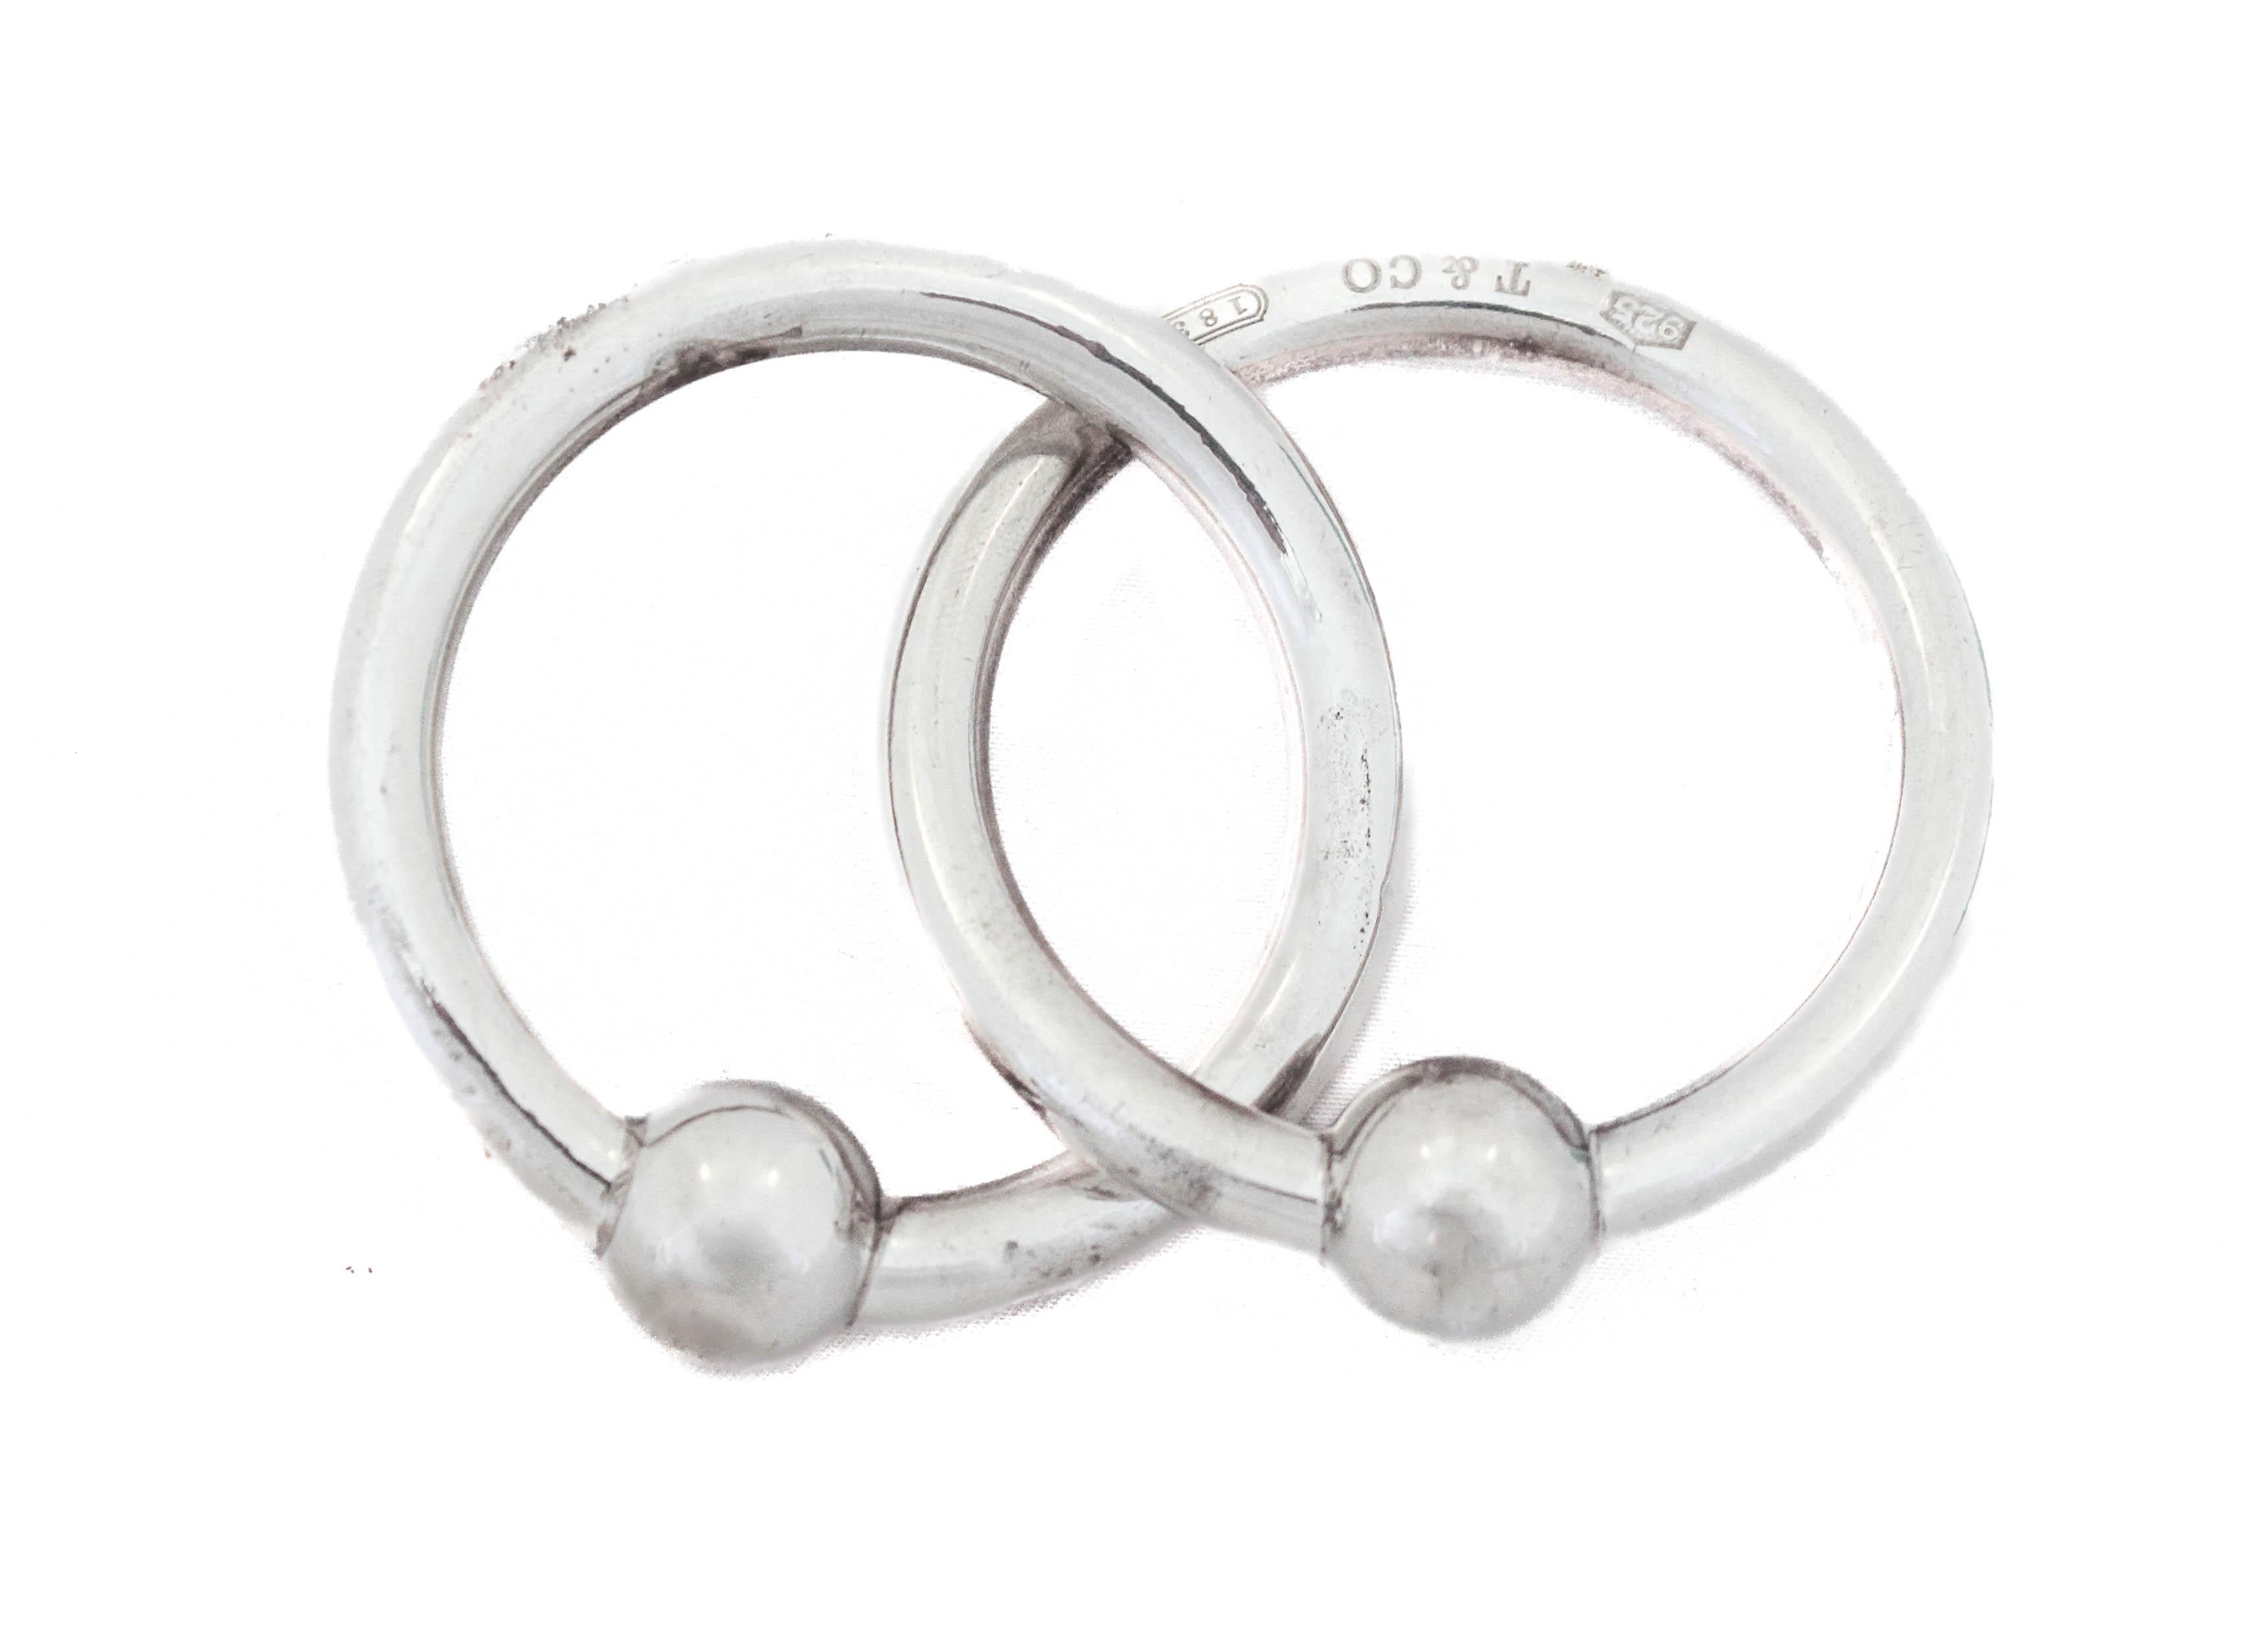 Being offered are sterling silver baby rattle rings by the world renowned Tiffany and Company.  Two silver rings intertwined to hold them together.  Mid-Century sleekness and sophistication for a twenty-first century twenty-first baby. 